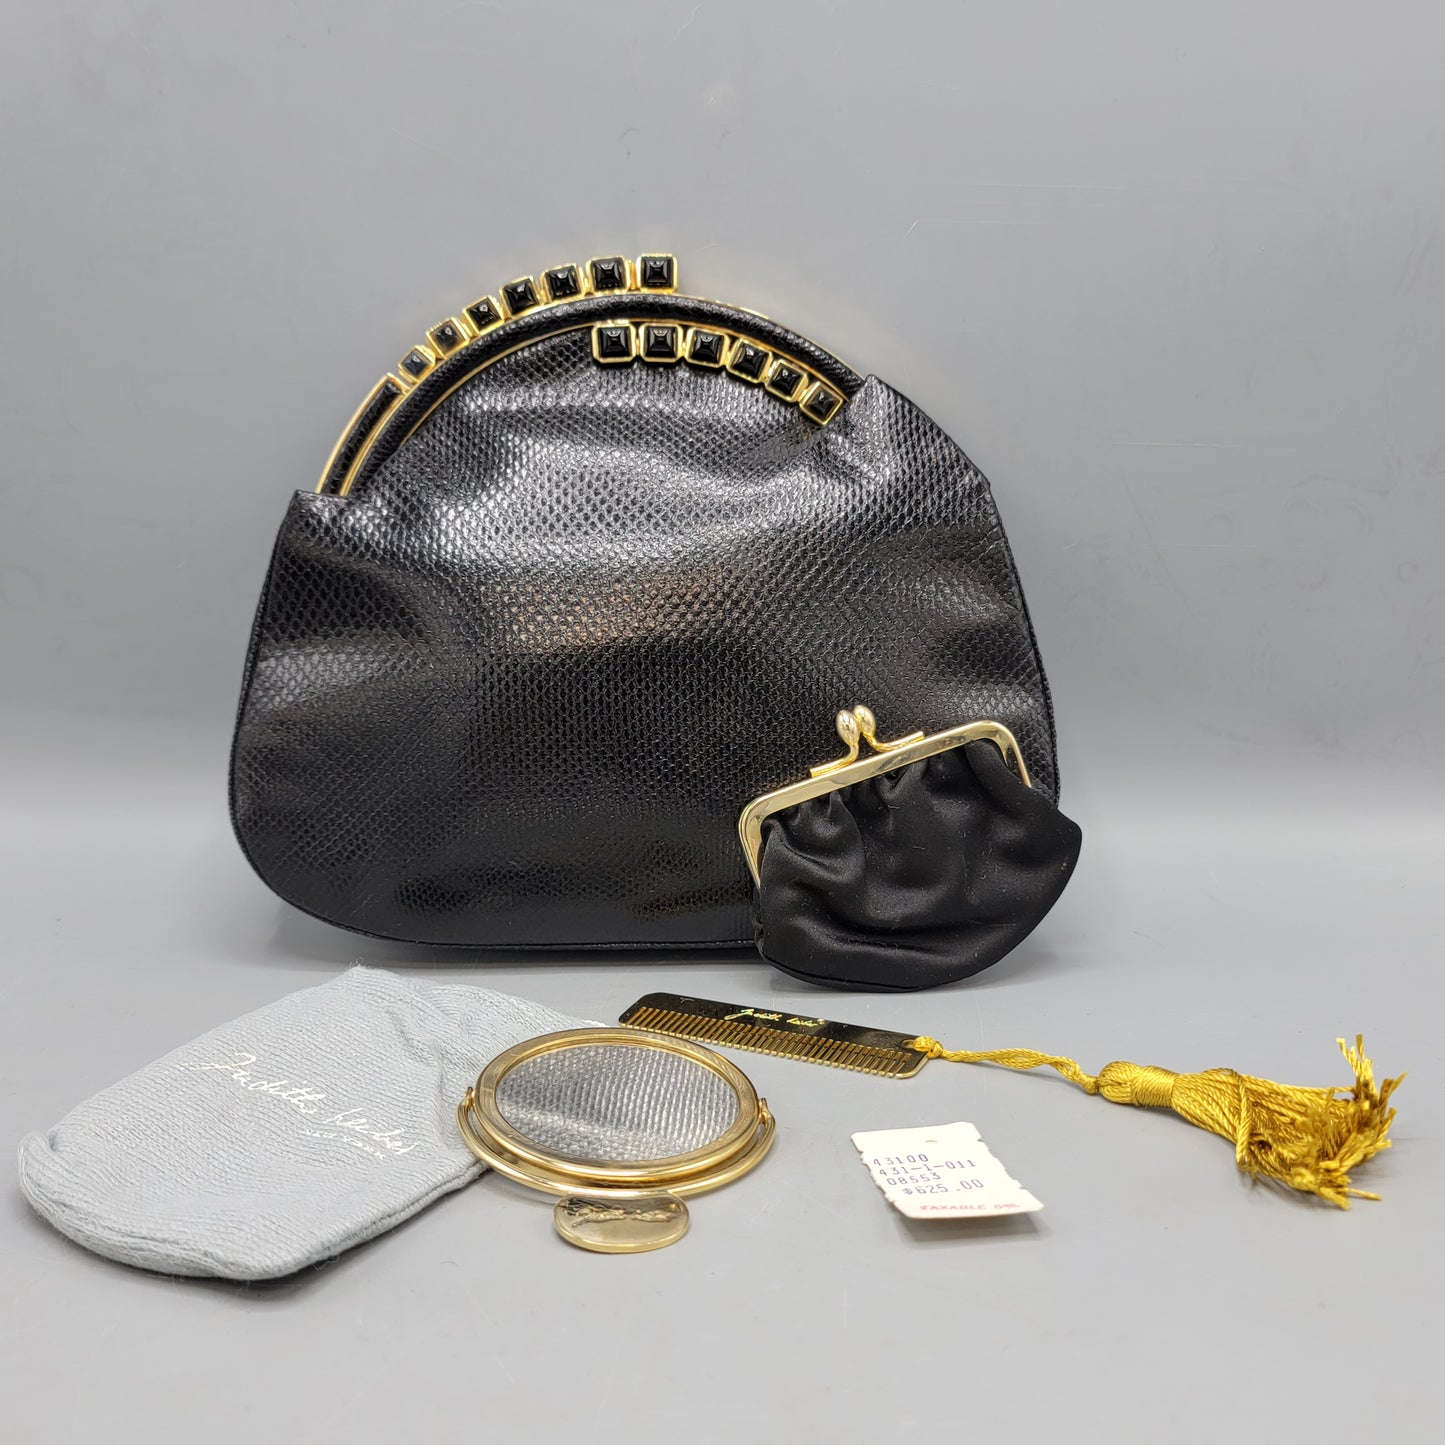 Judith Leiber Black Simulated Snakeskin Handbag / Clutch with Accessories